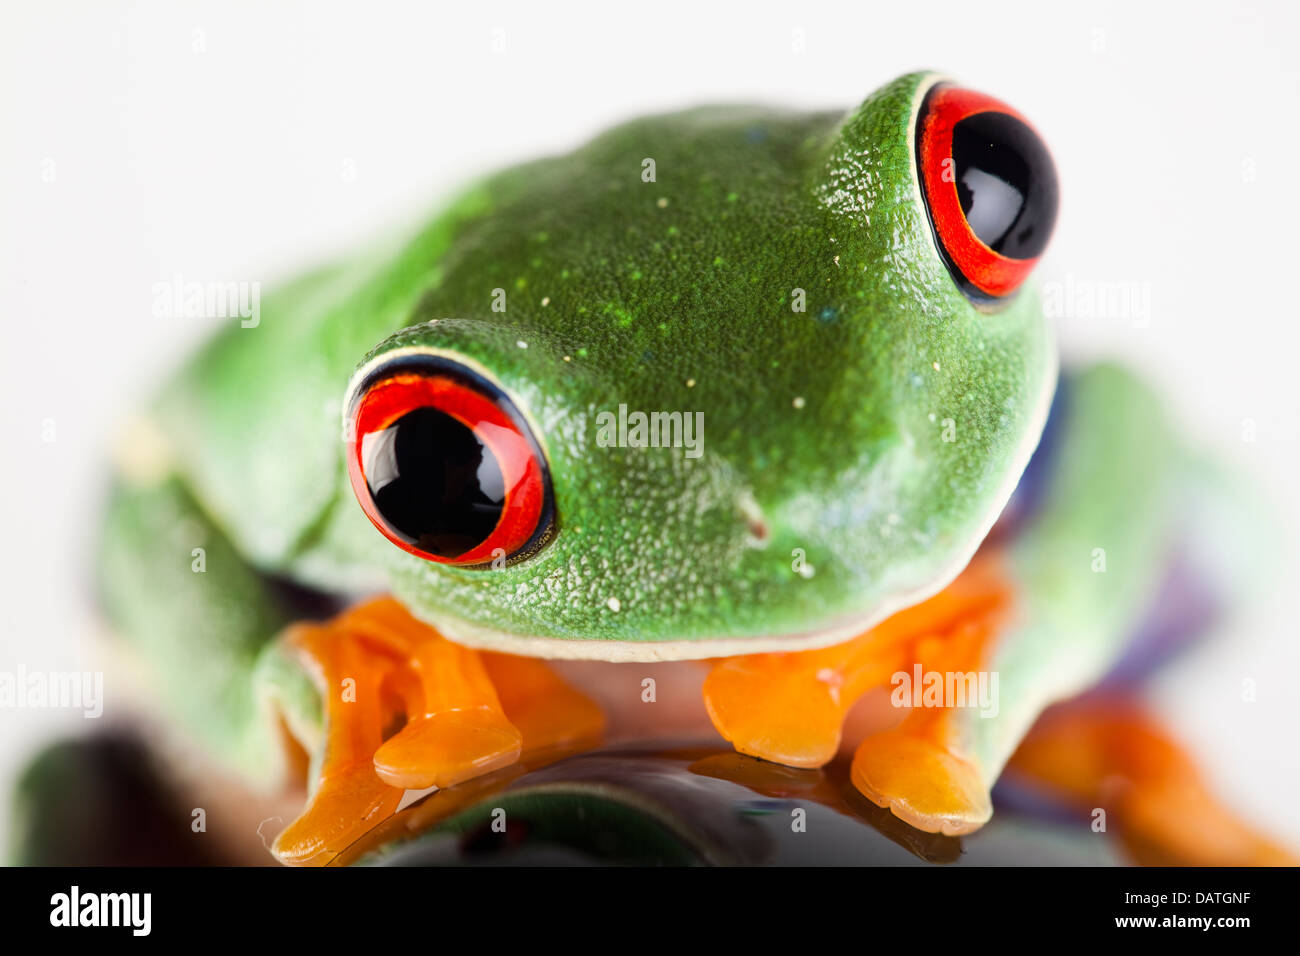 Piccolo animale red eyed frog Foto Stock